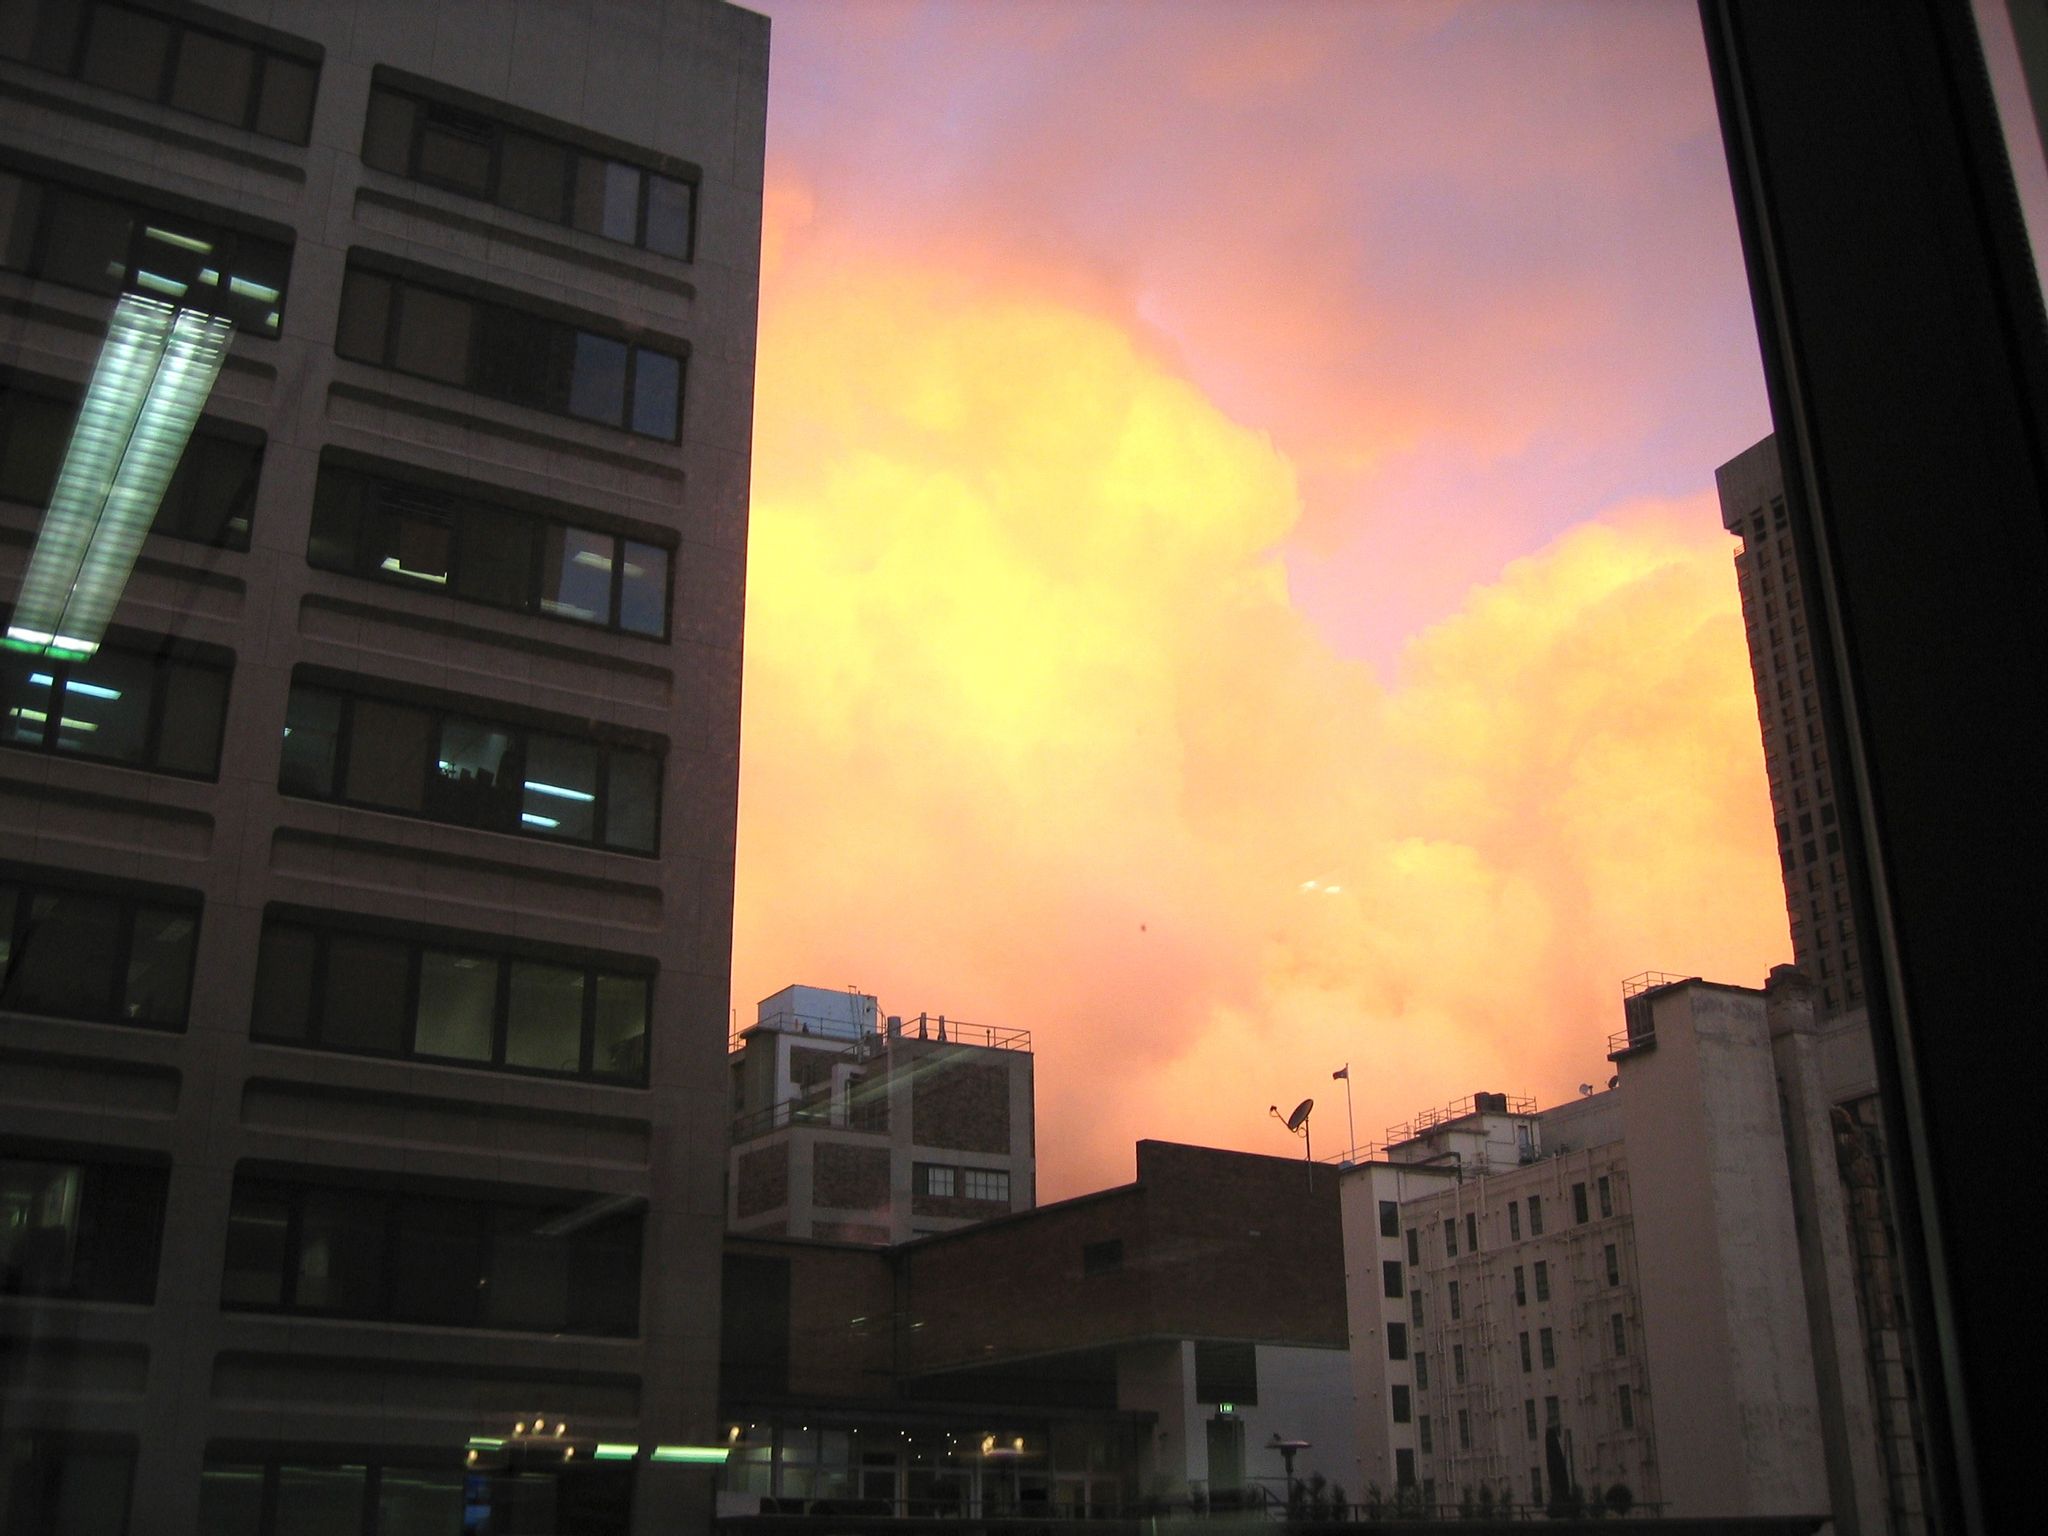 A photo looking out the window of my work desk with very fluffy, very orange clouds in between two tall buildings.